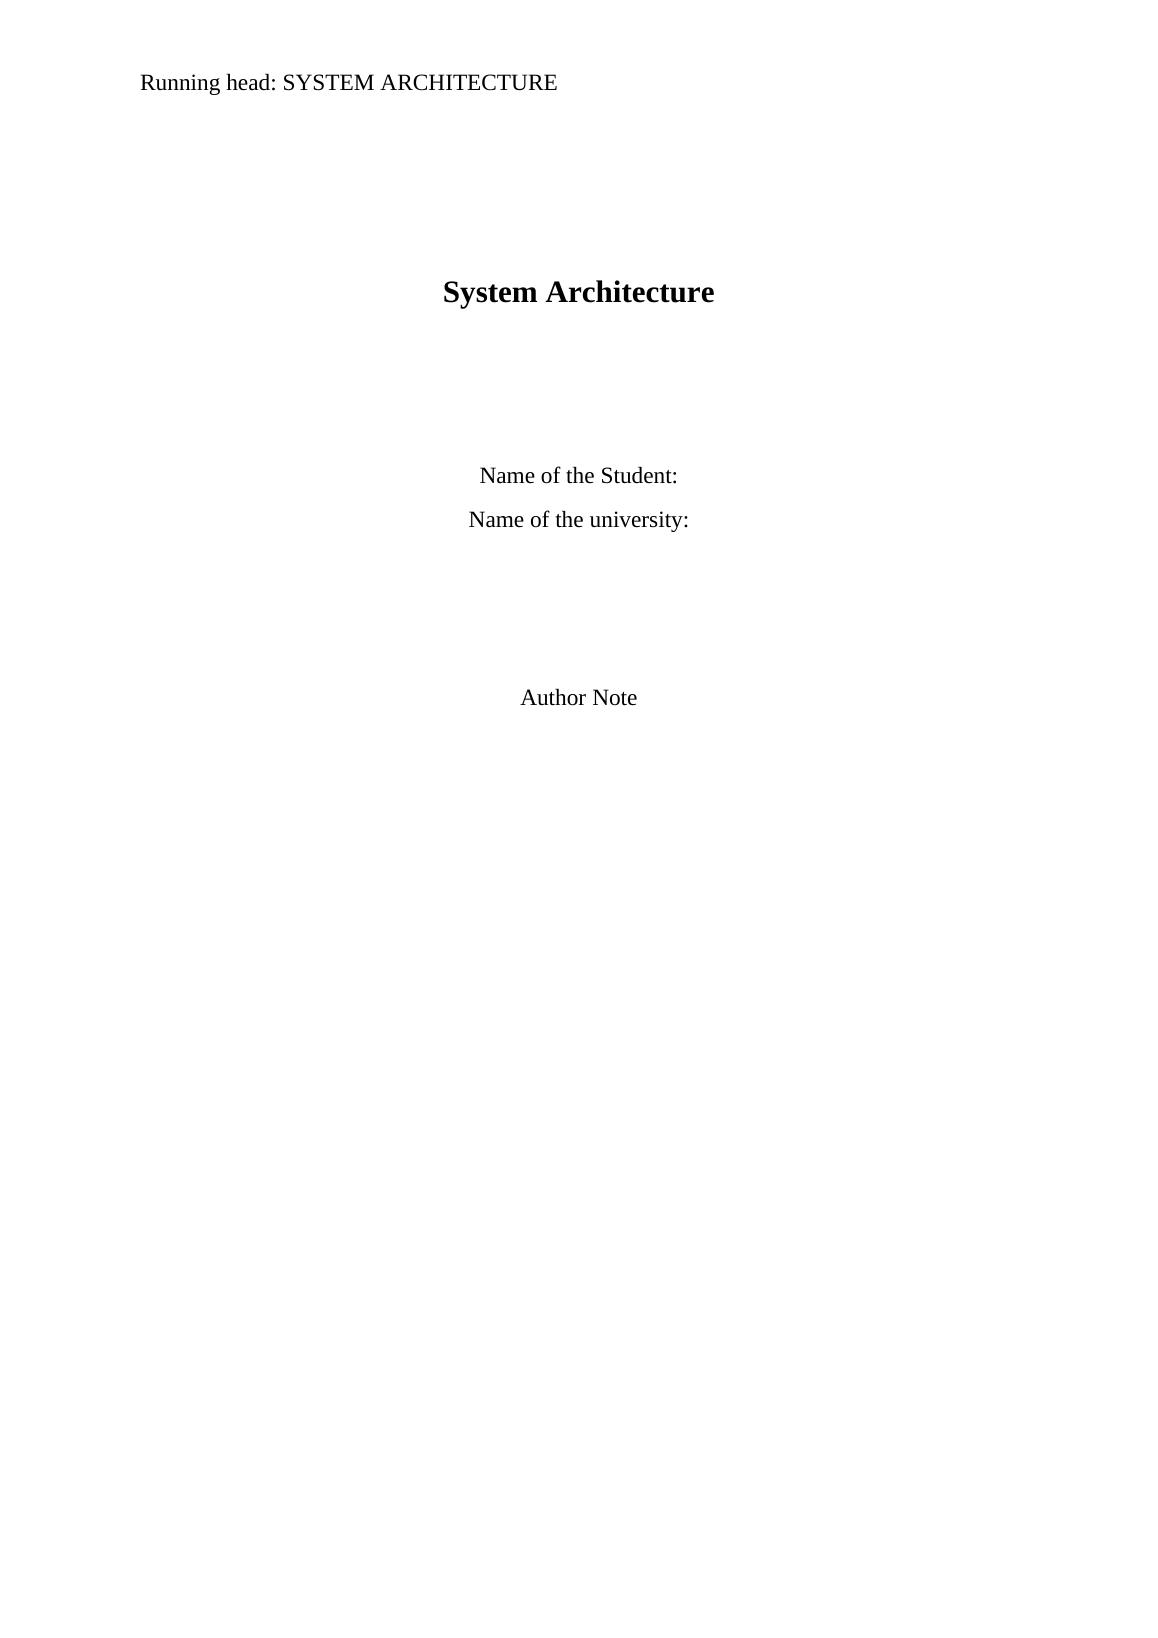 System Architecture_1